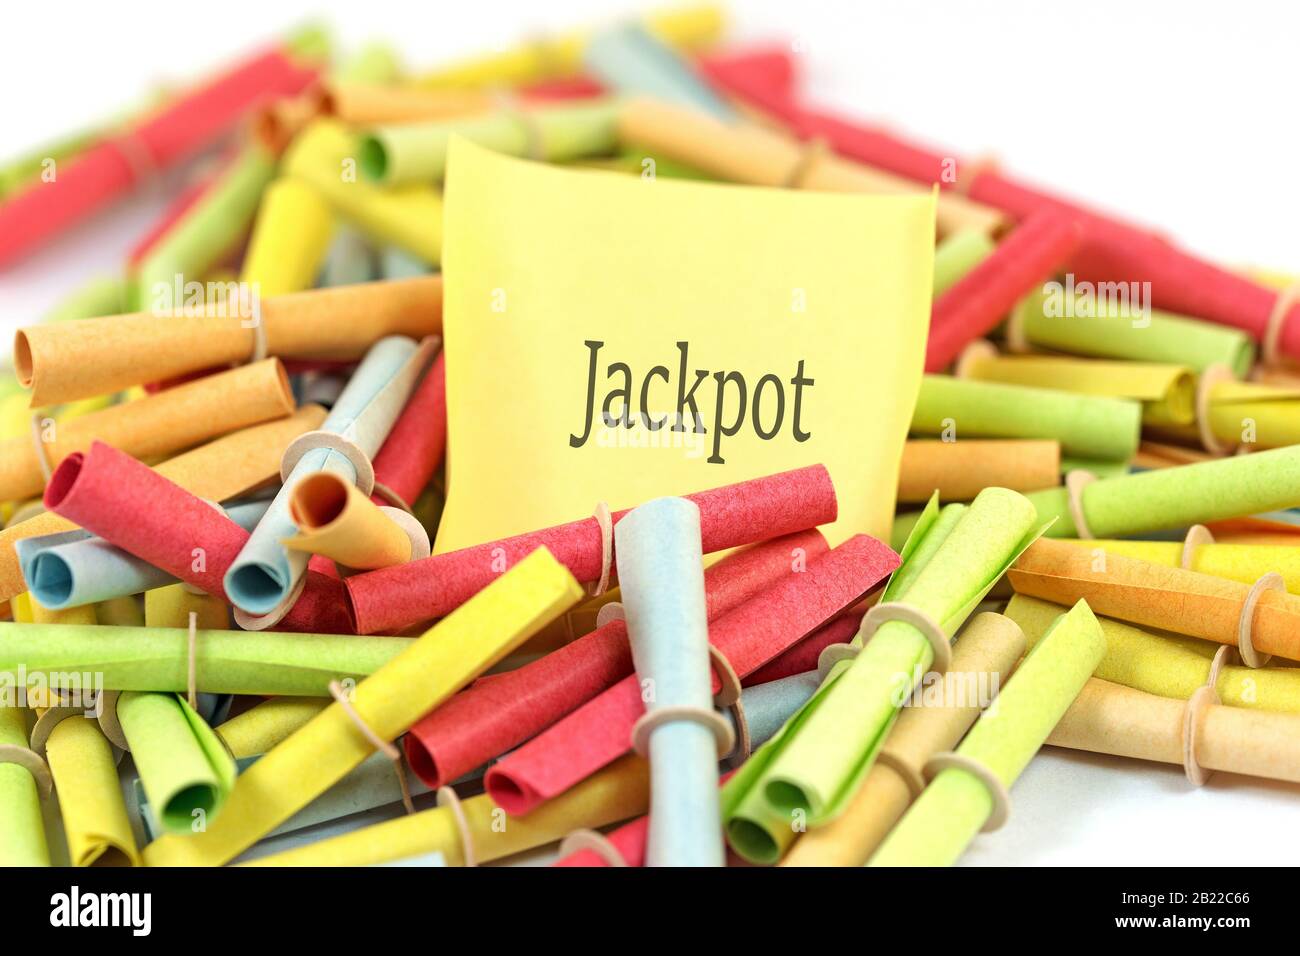 lottery-tickets-with-first-prize-jackpot-stock-photo-alamy